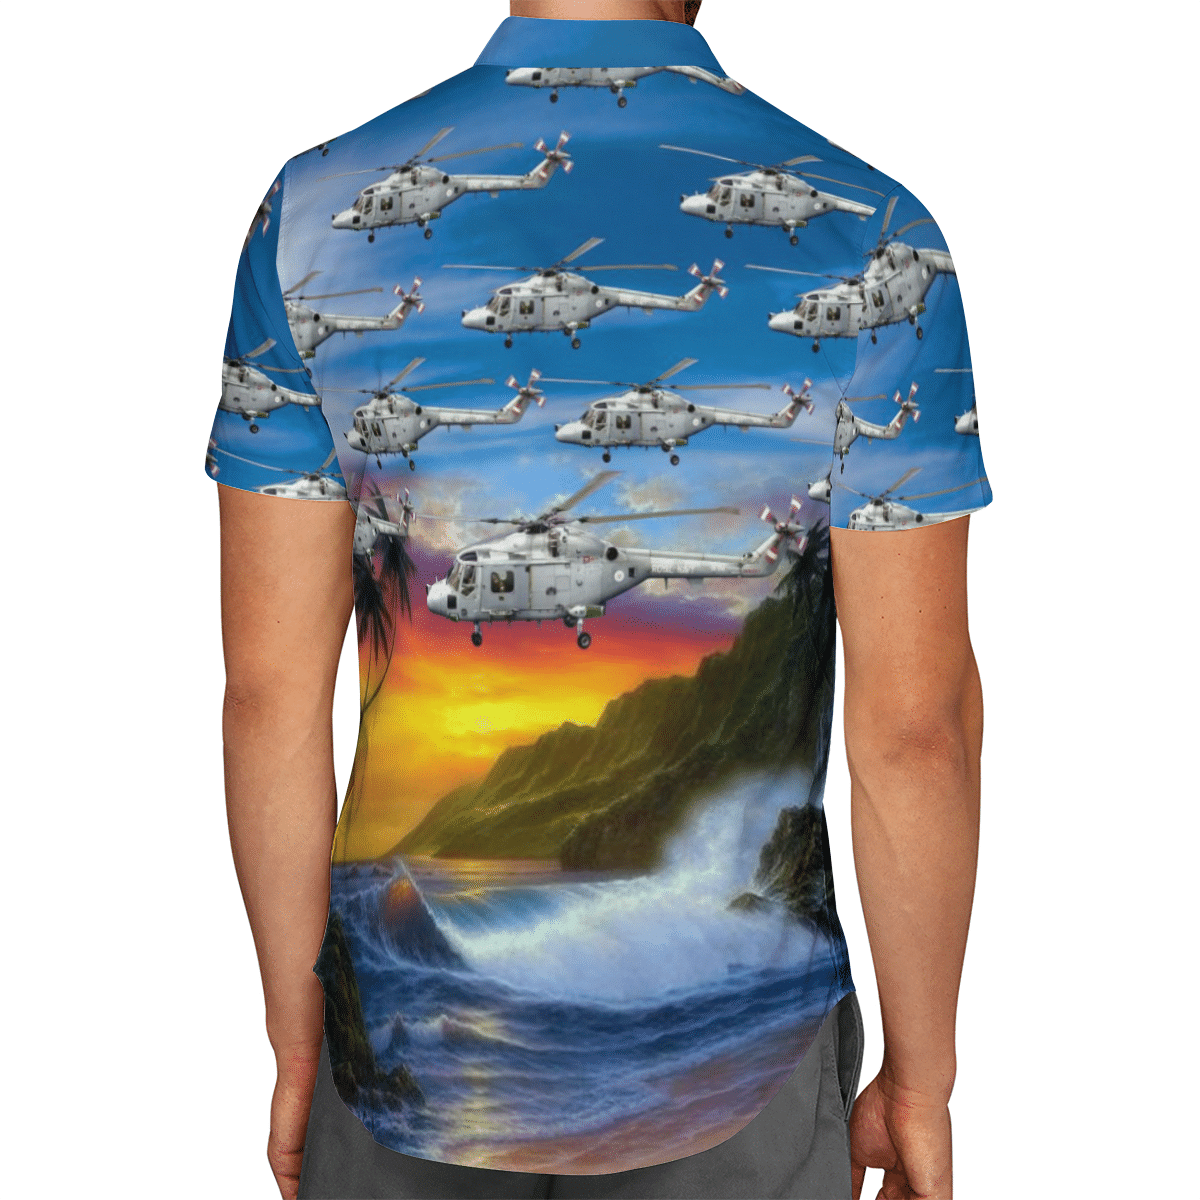 Going to the beach with a quality shirt 145